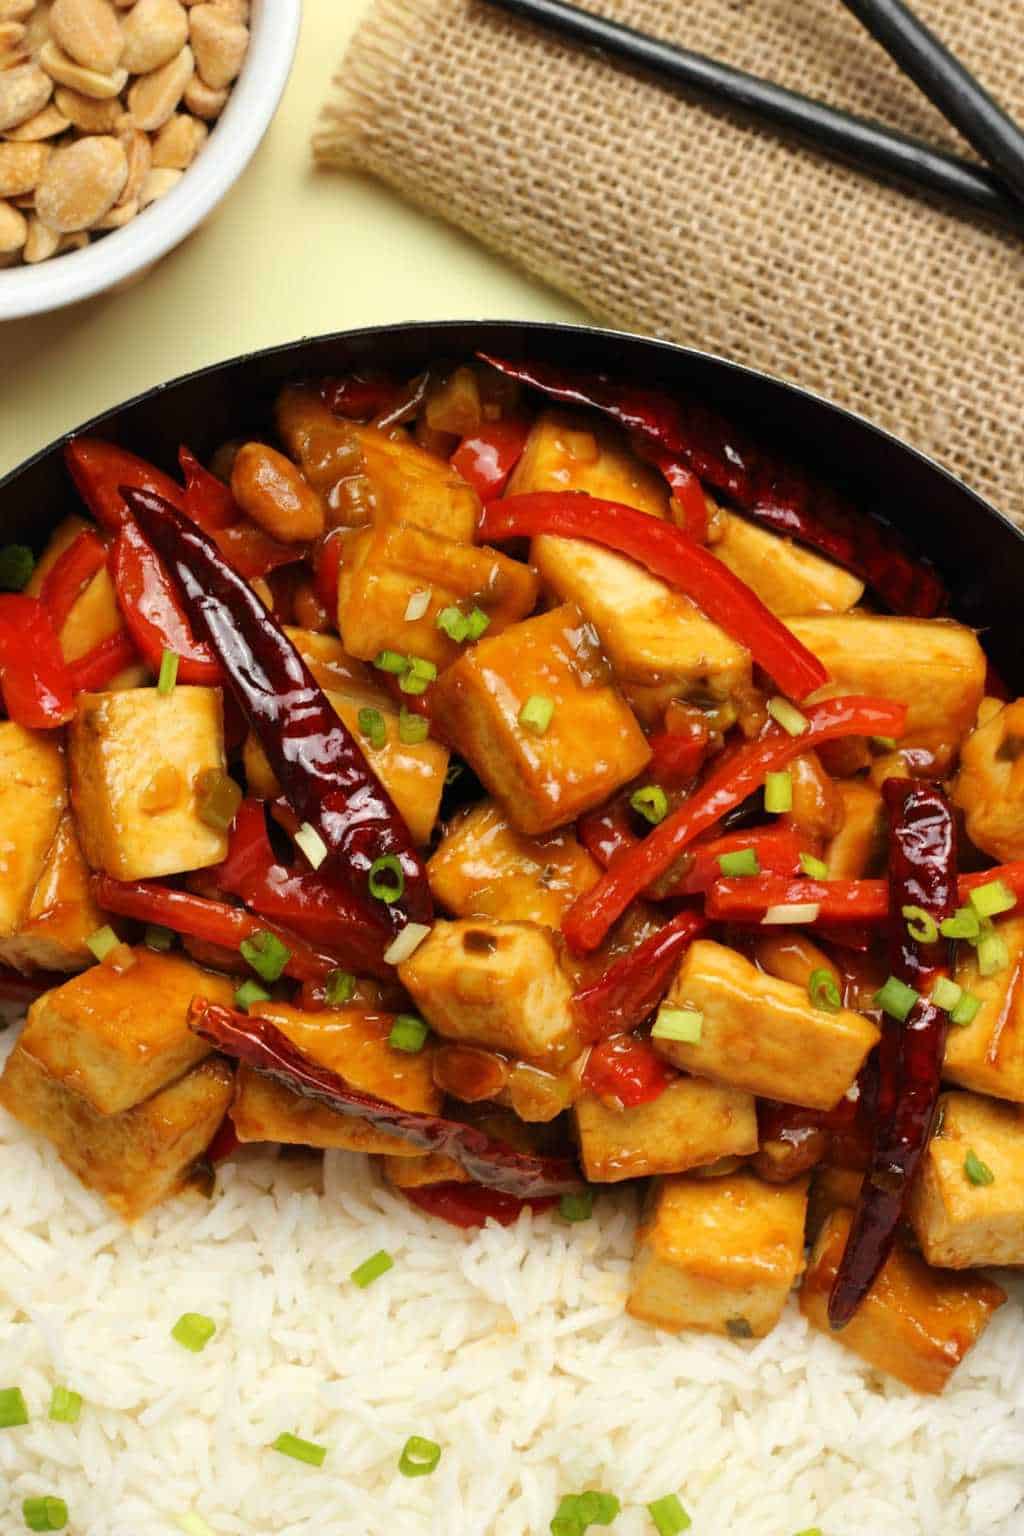 Kung pao tofu served in a wok with basmati rice and topped with chopped spring onions.